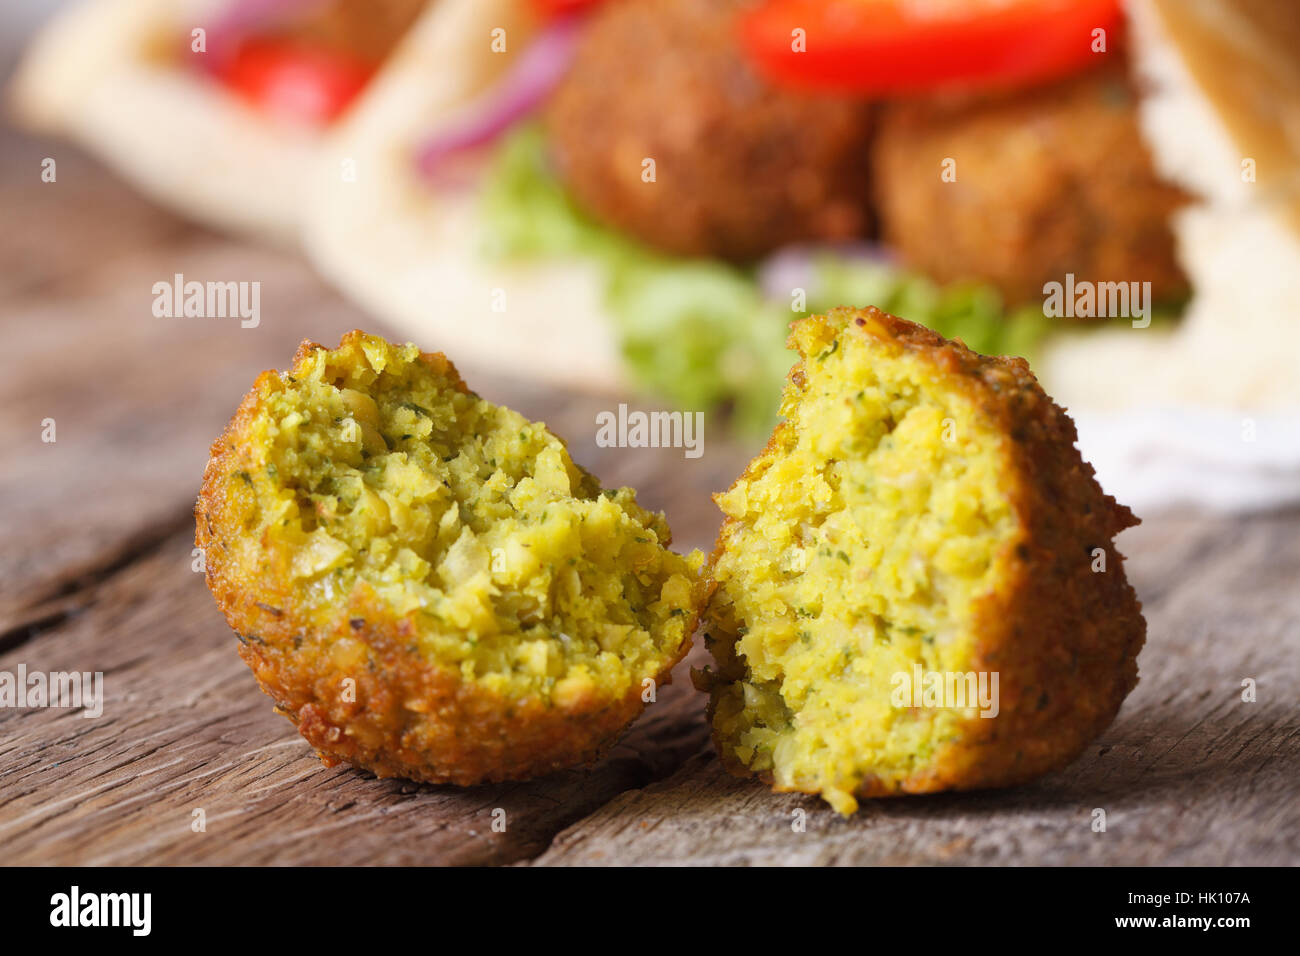 falafel macro on an old wooden table against the background of pita bread with vegetables horizontal Stock Photo